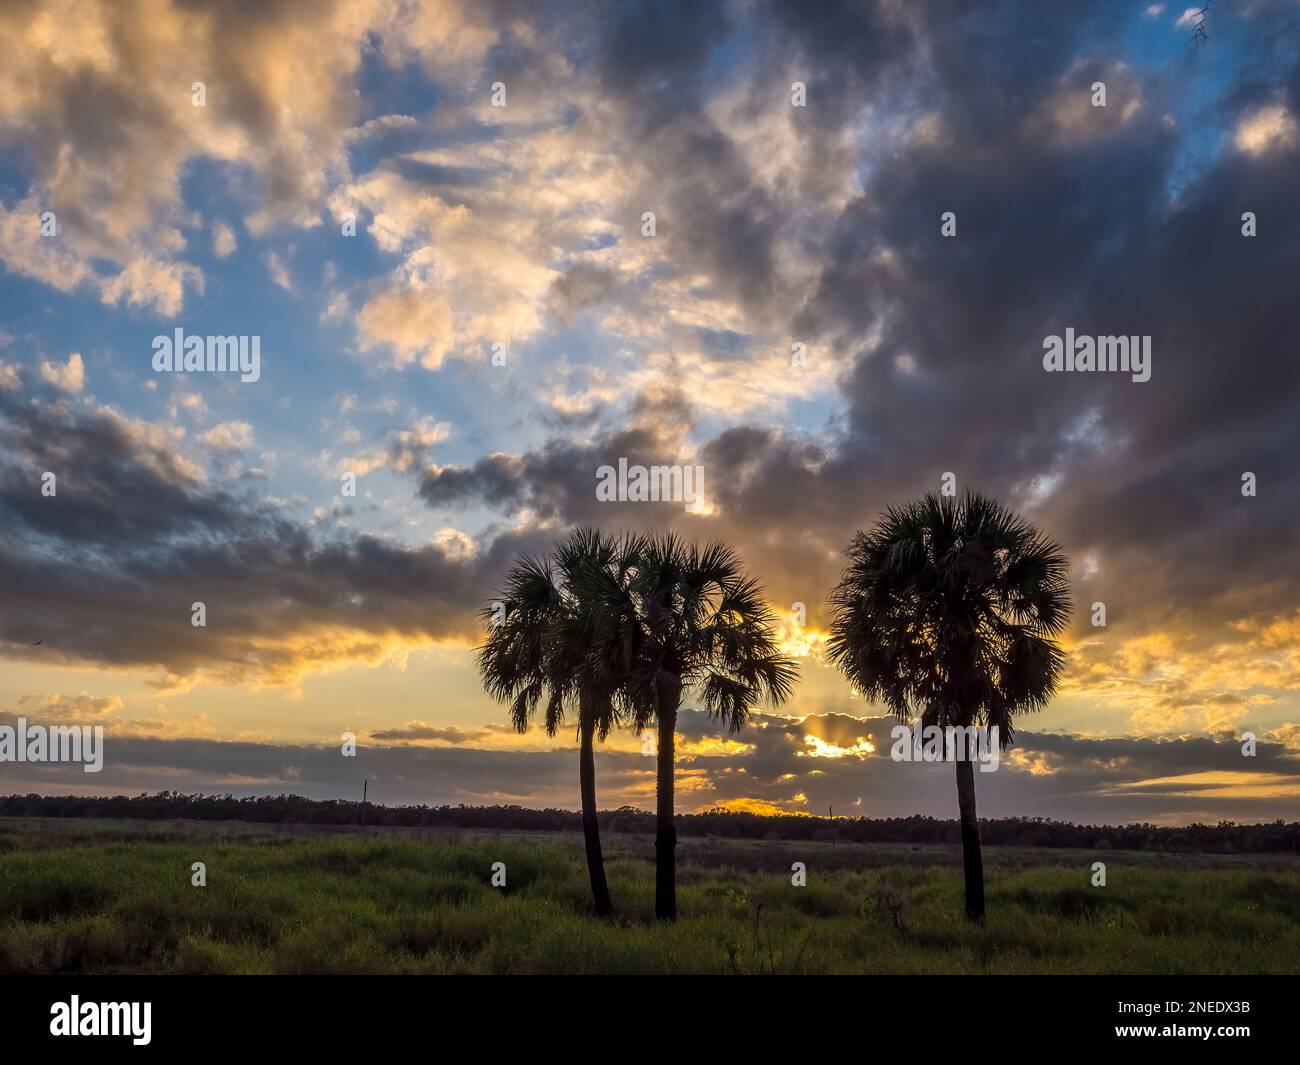 Palm trees silhouetted aganist a sunset sky in Myakka River State Park in Sarasota Florida USA Stock Photo